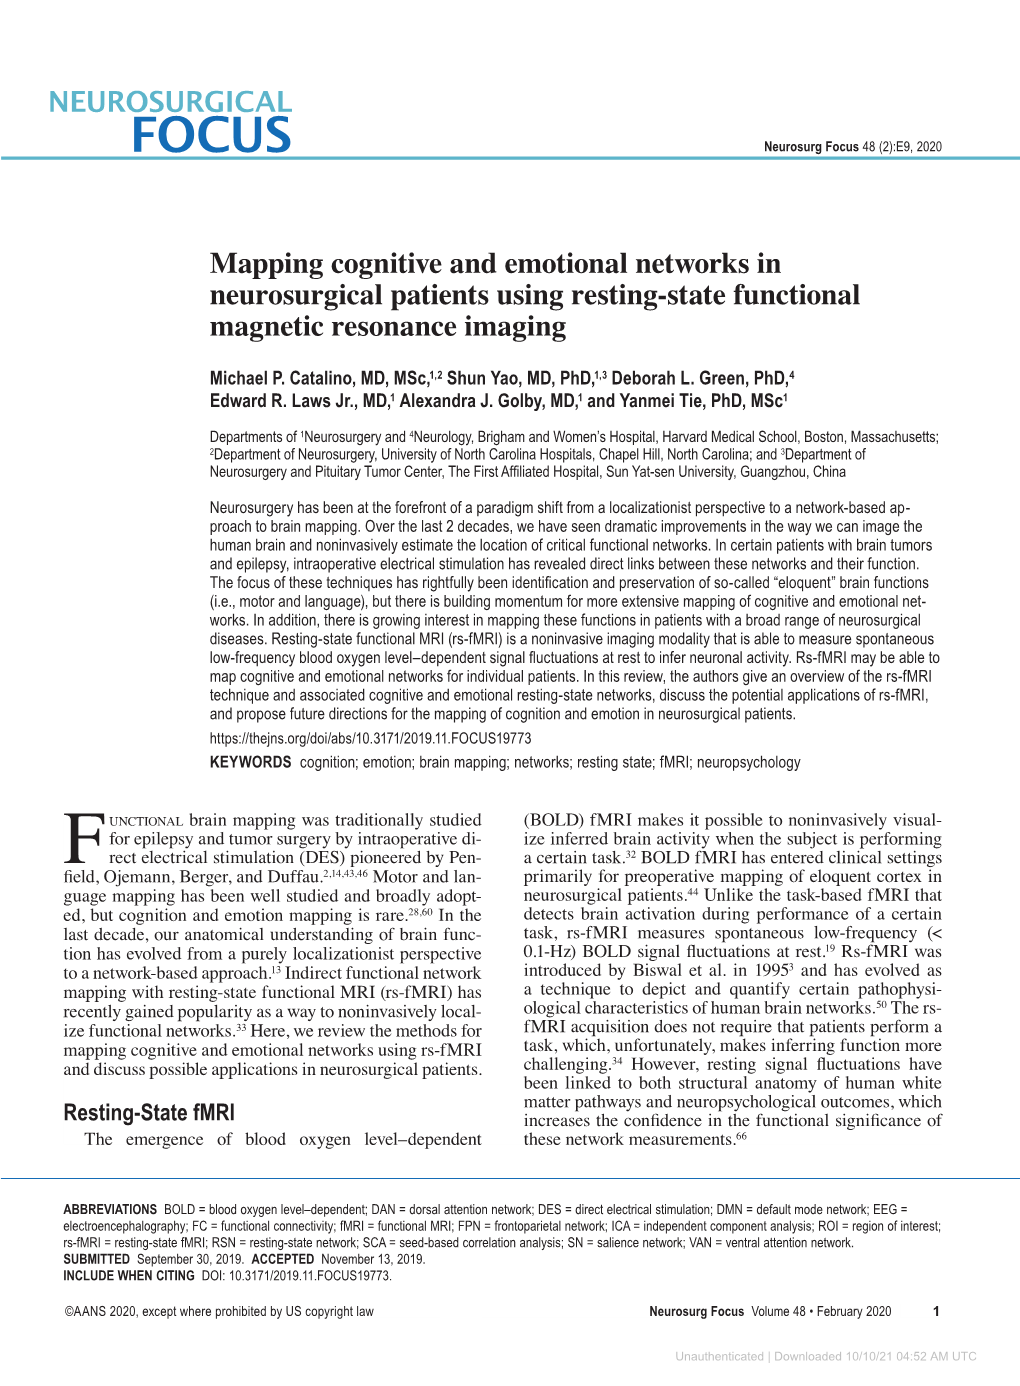 Mapping Cognitive and Emotional Networks in Neurosurgical Patients Using Resting-State Functional Magnetic Resonance Imaging